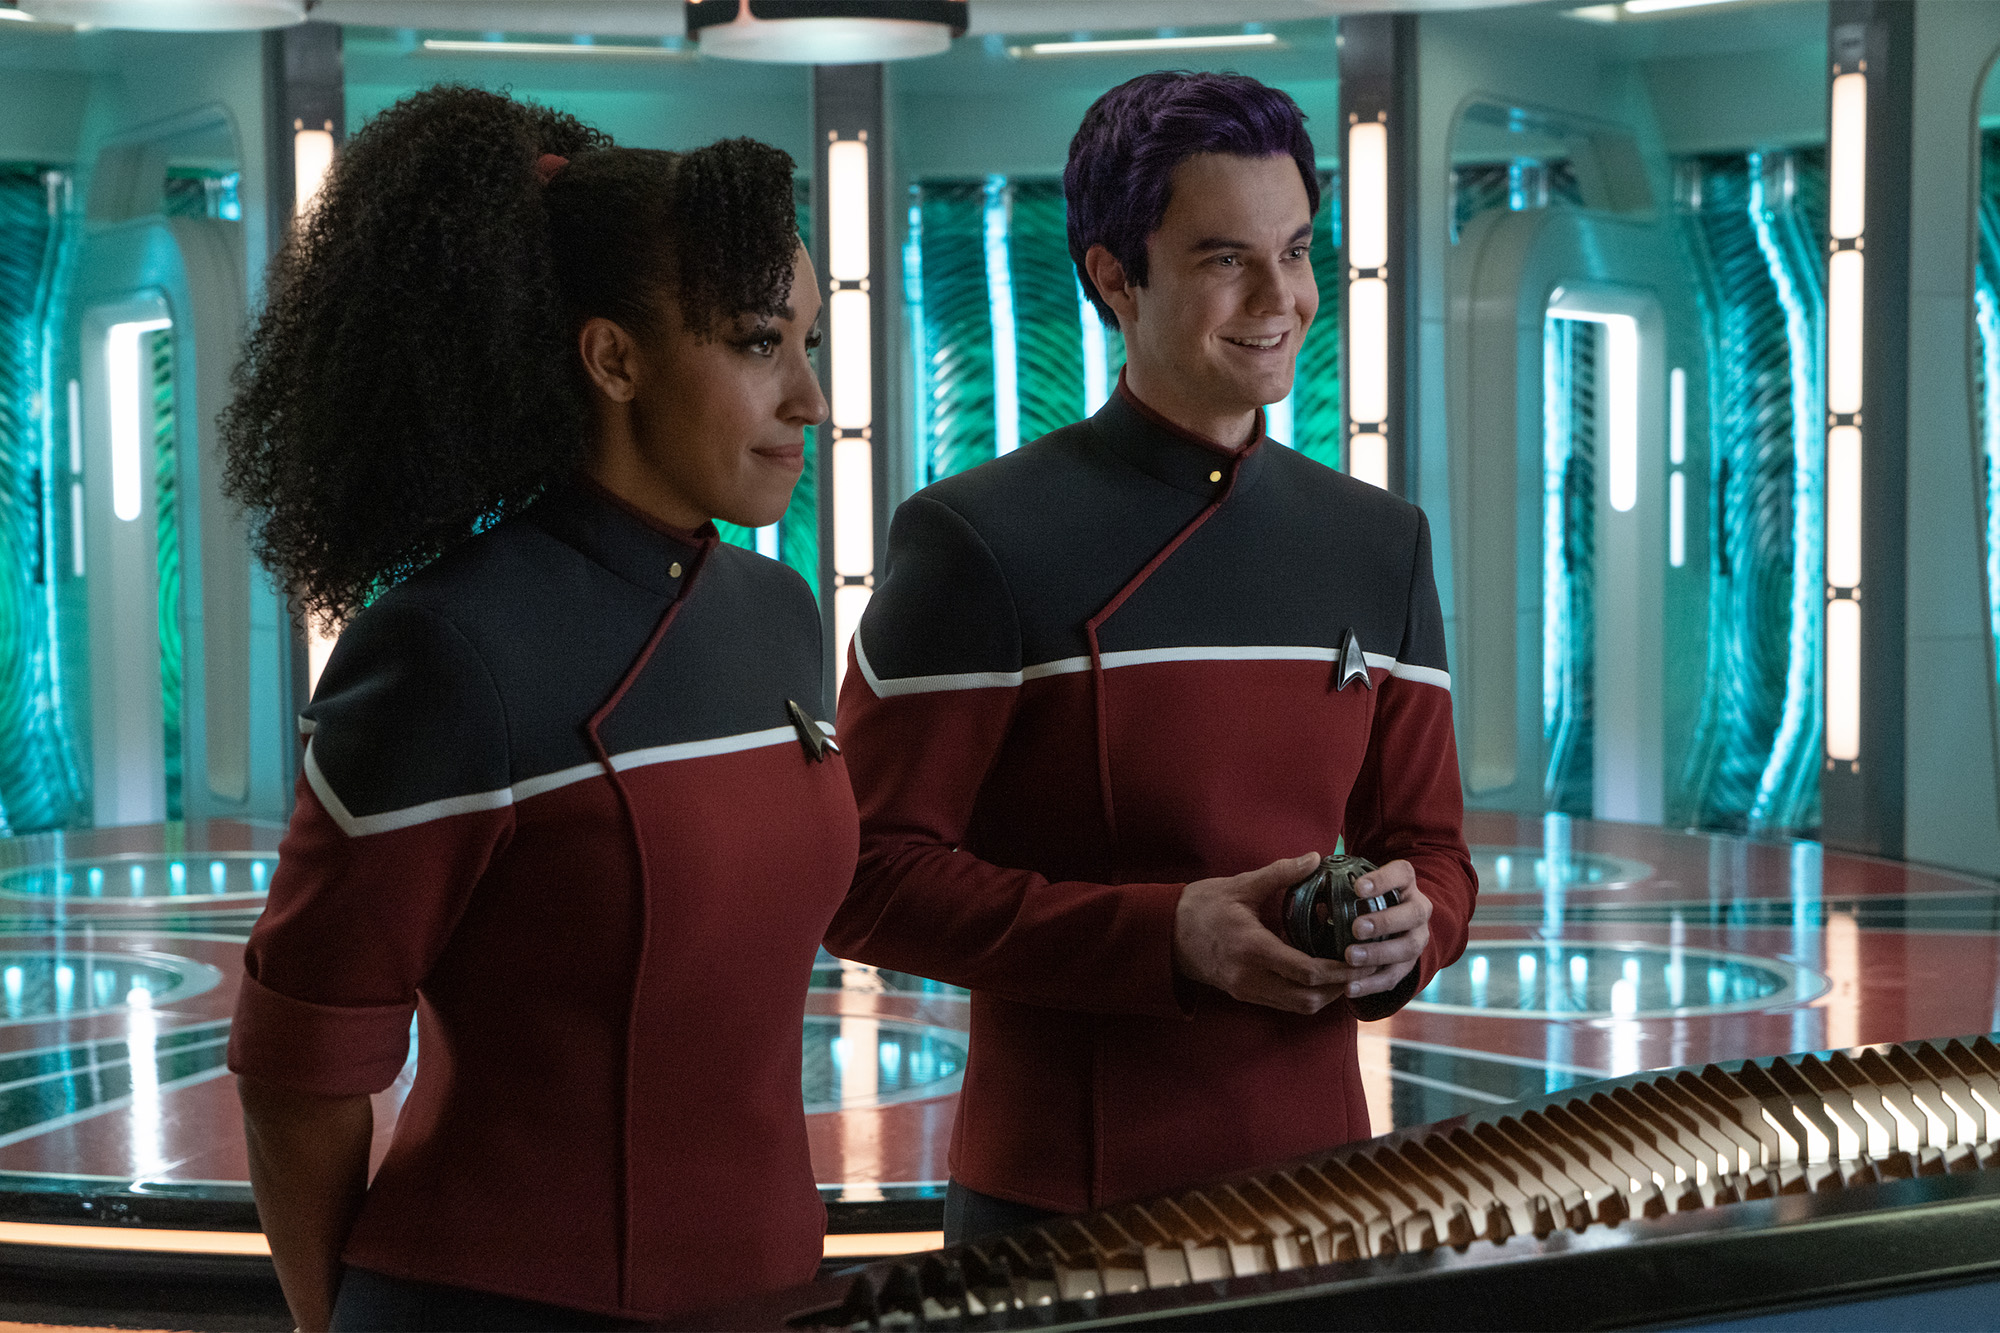 Tawny Newsome and Jack Quaid reprise their animated 'Star Trek: Lower Decks' roles in live-action on 'Star Trek: Strange New Worlds'